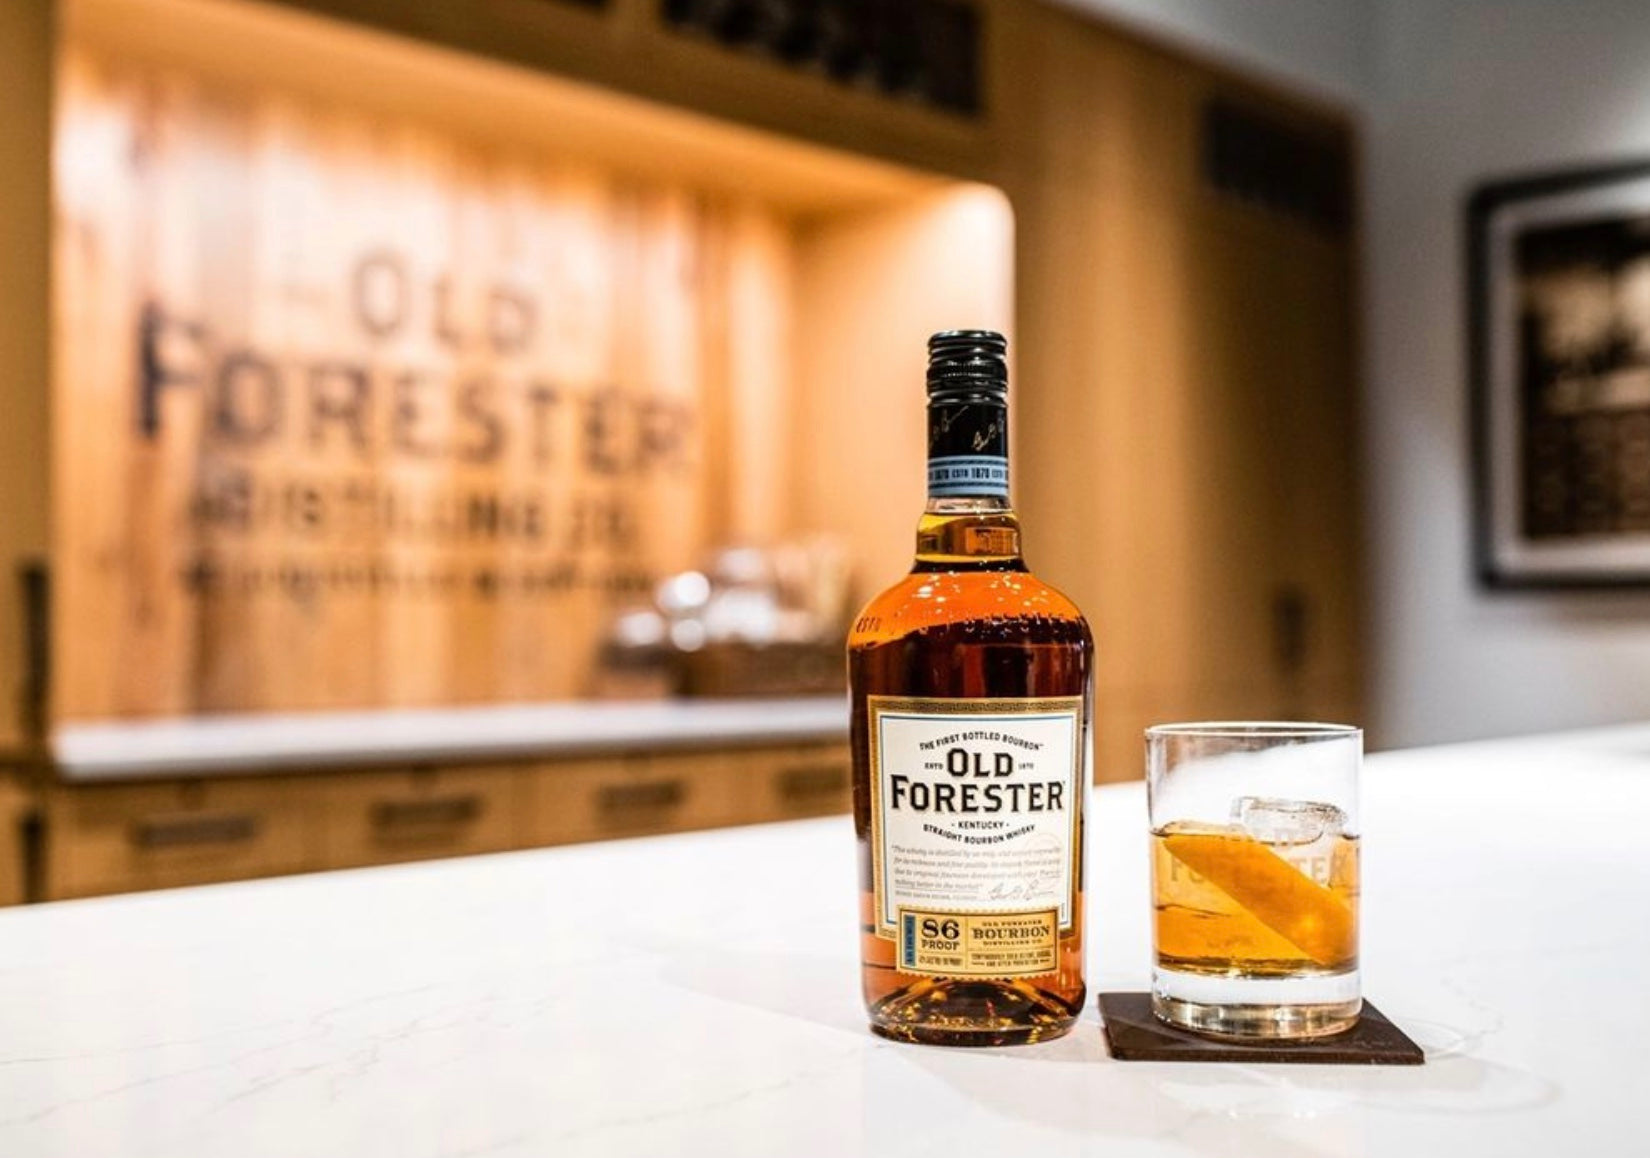 Old Forester Straight Bourbon (86 Proof)